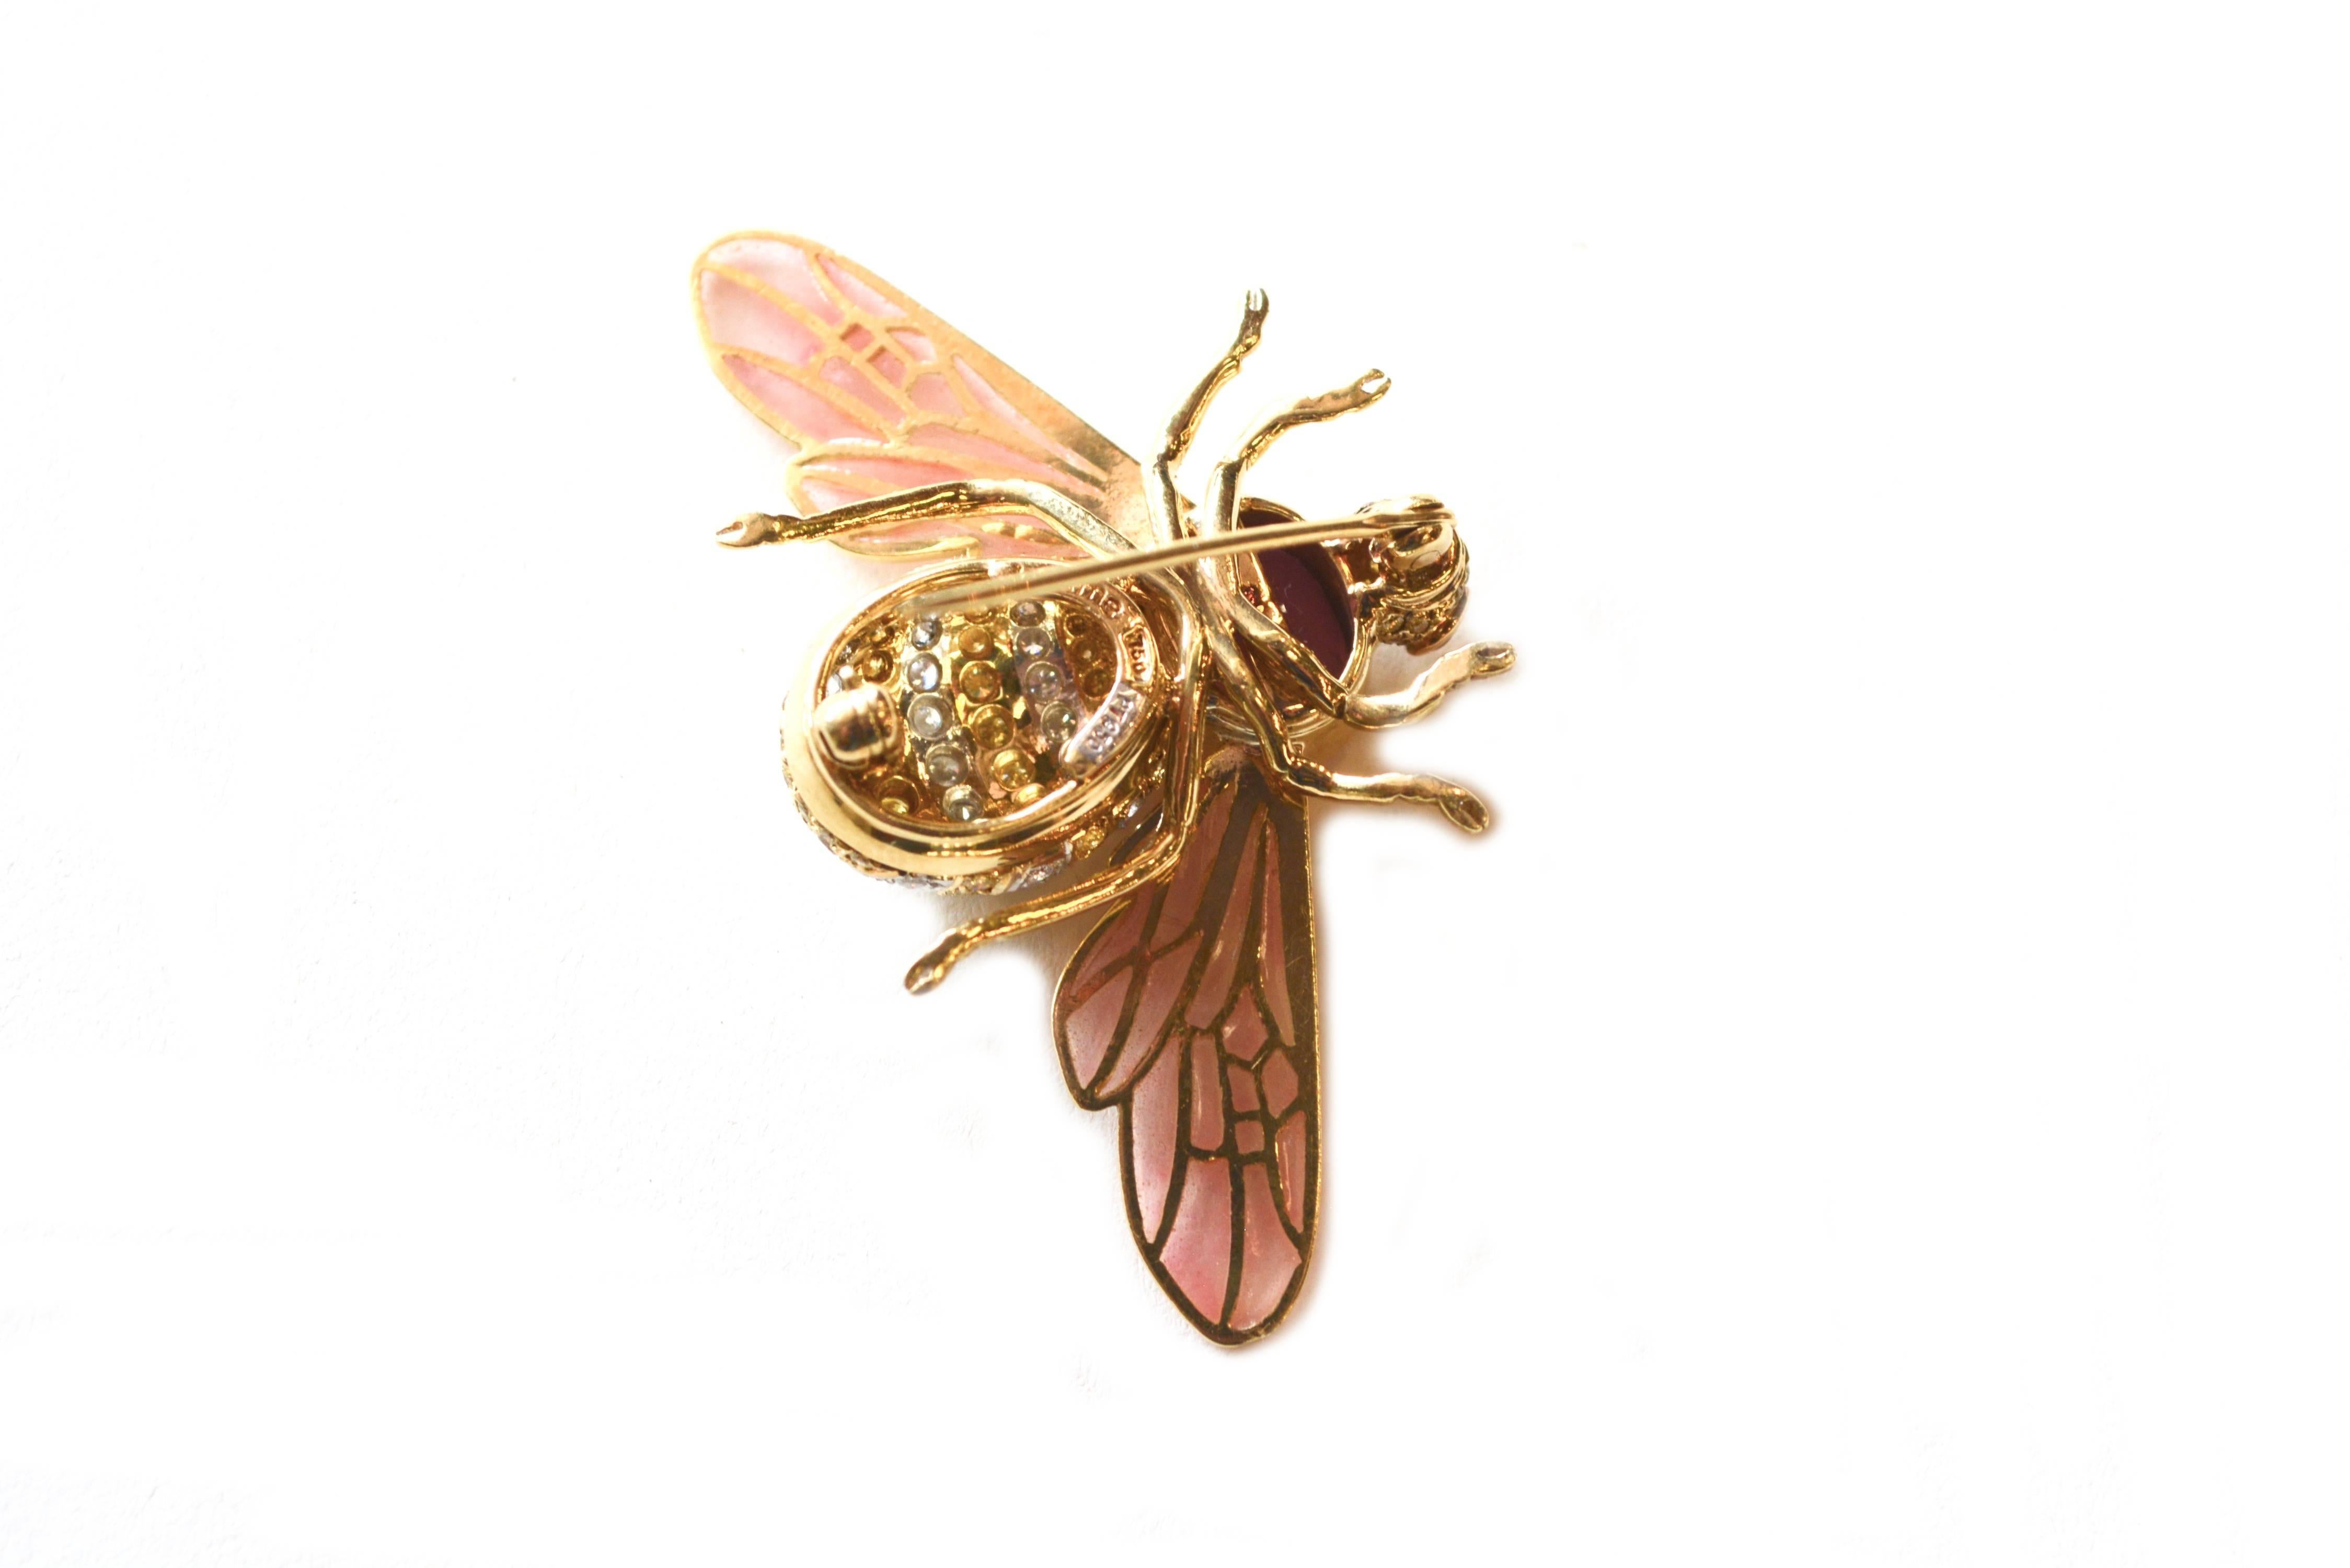 Pink plique-a-jour bee brooch set in 18K gold and platinum rubellite thorax 3.36 ct. Pave white diamonds .7 ct and canary diamond 1.25 ct body. Ruby eyes. About 1.5